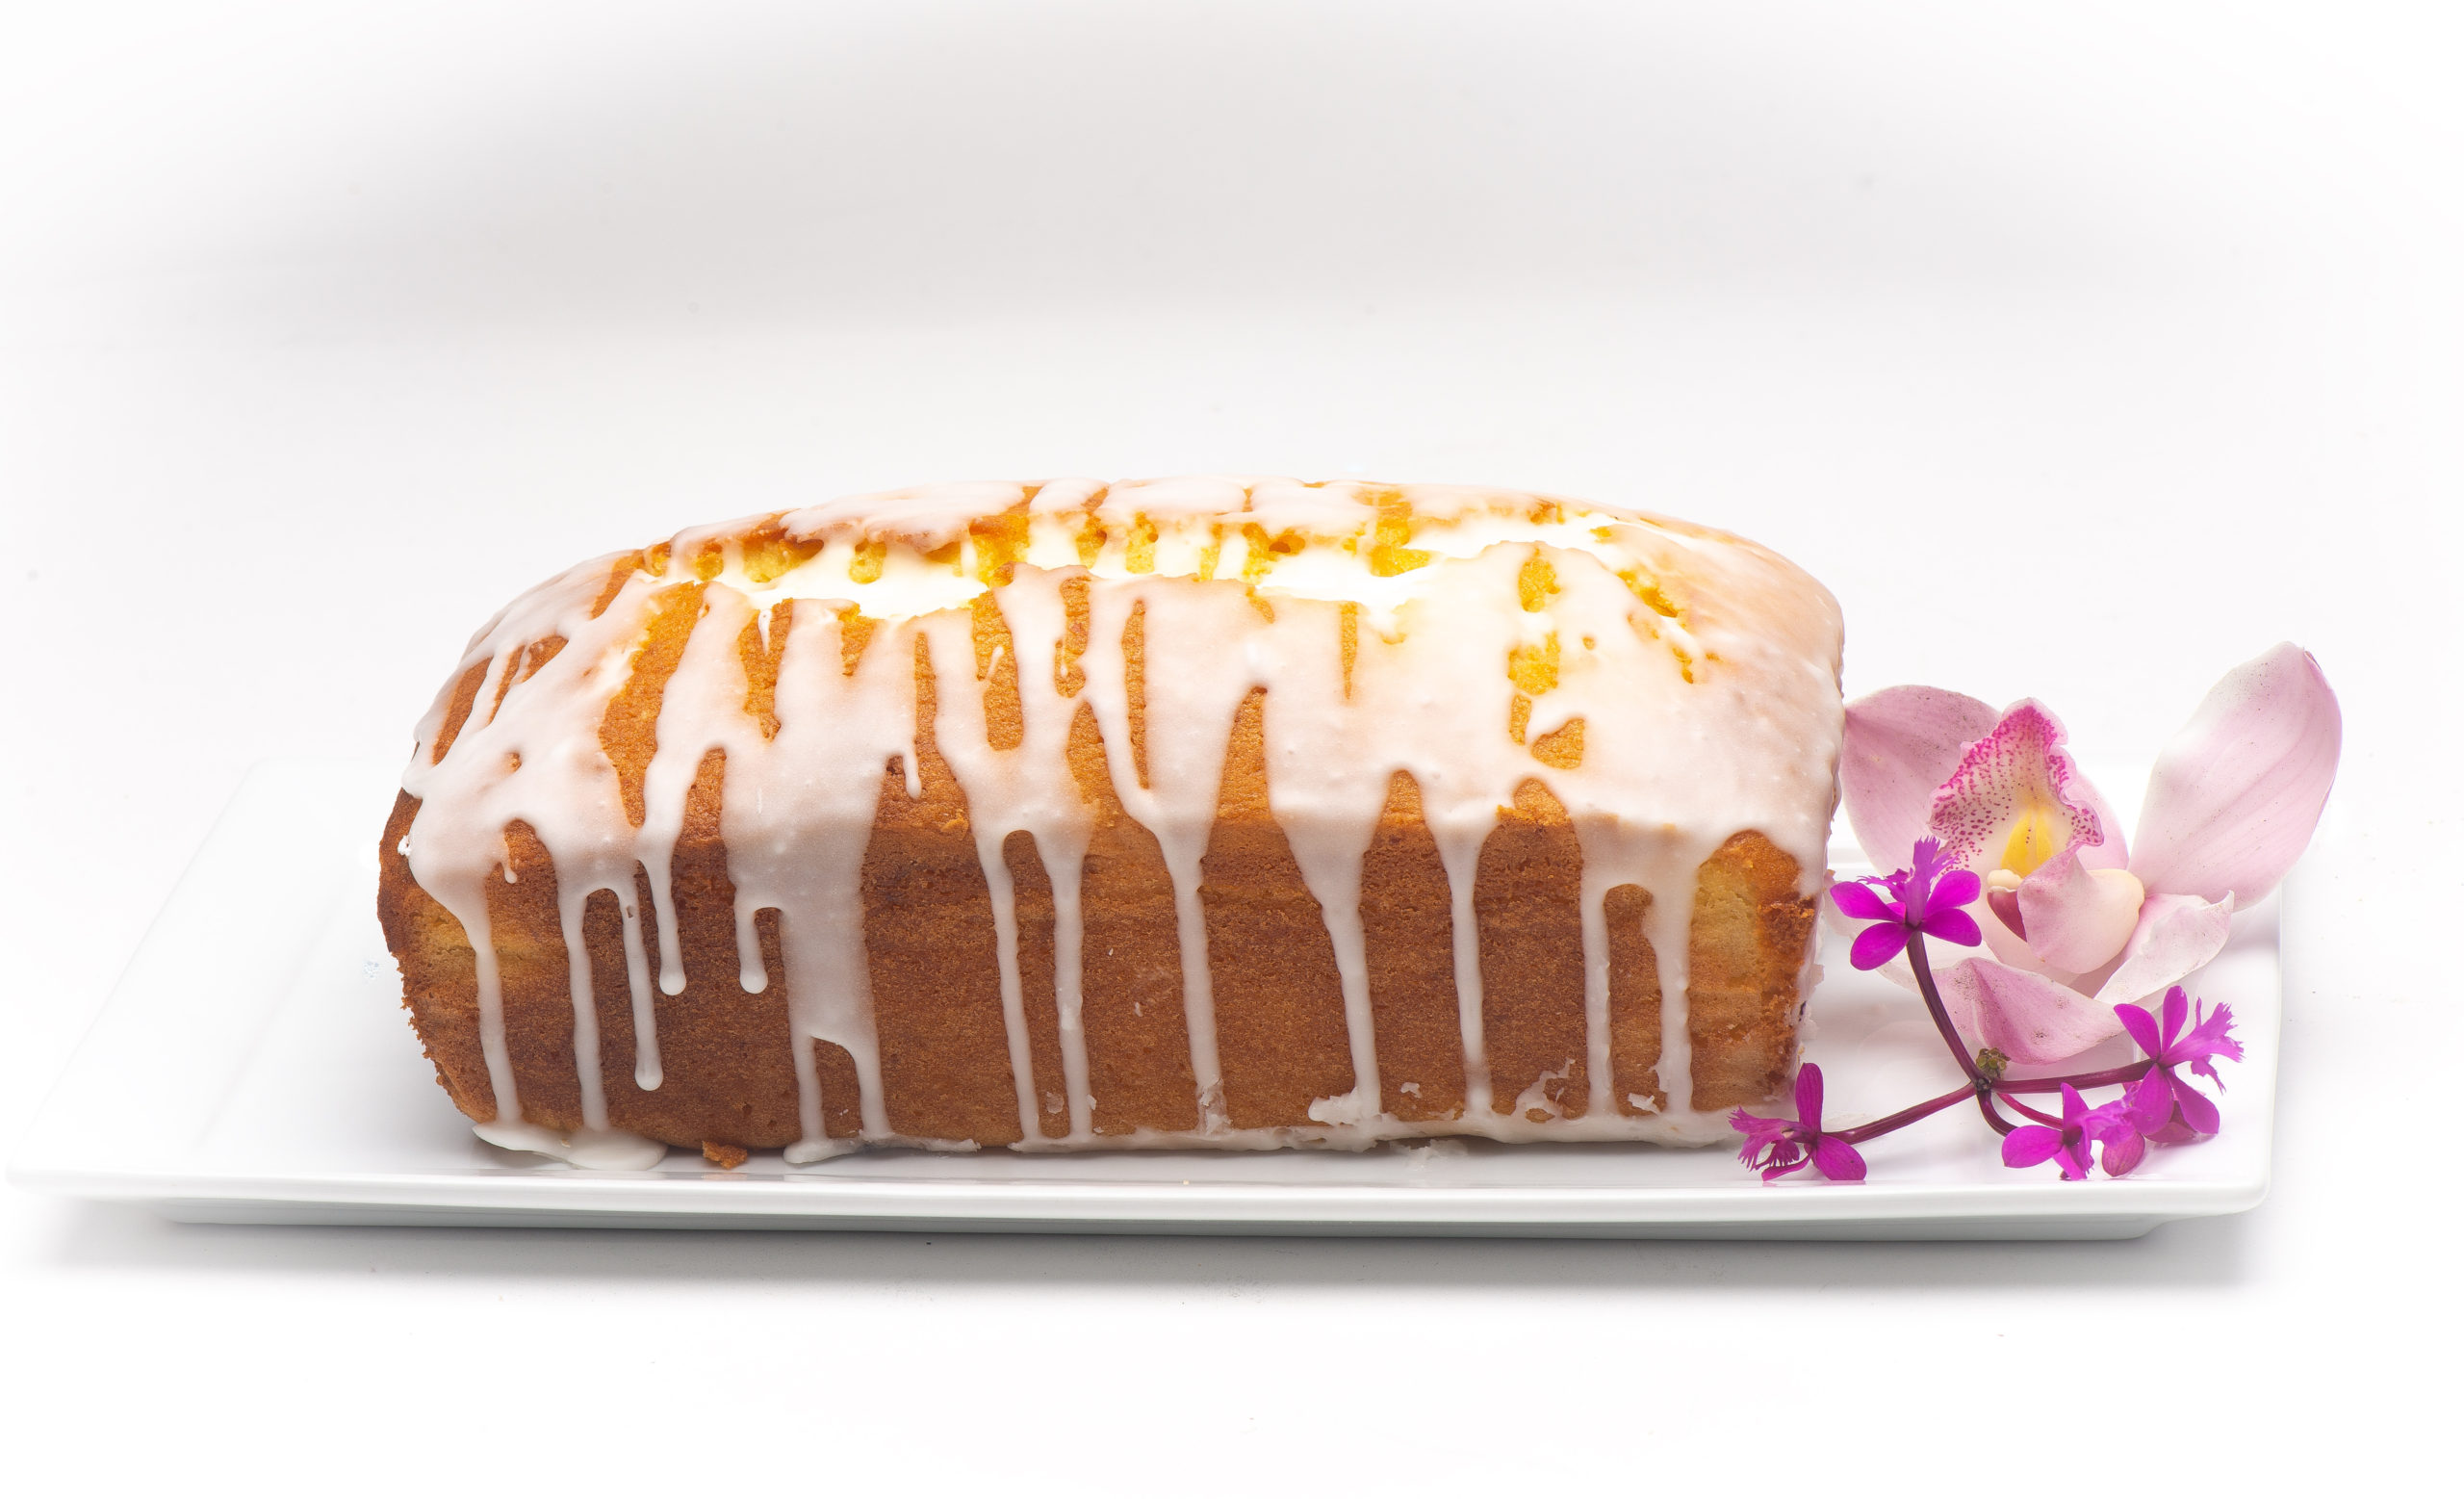 Be Our Belated Valentine With This Lemon Cake